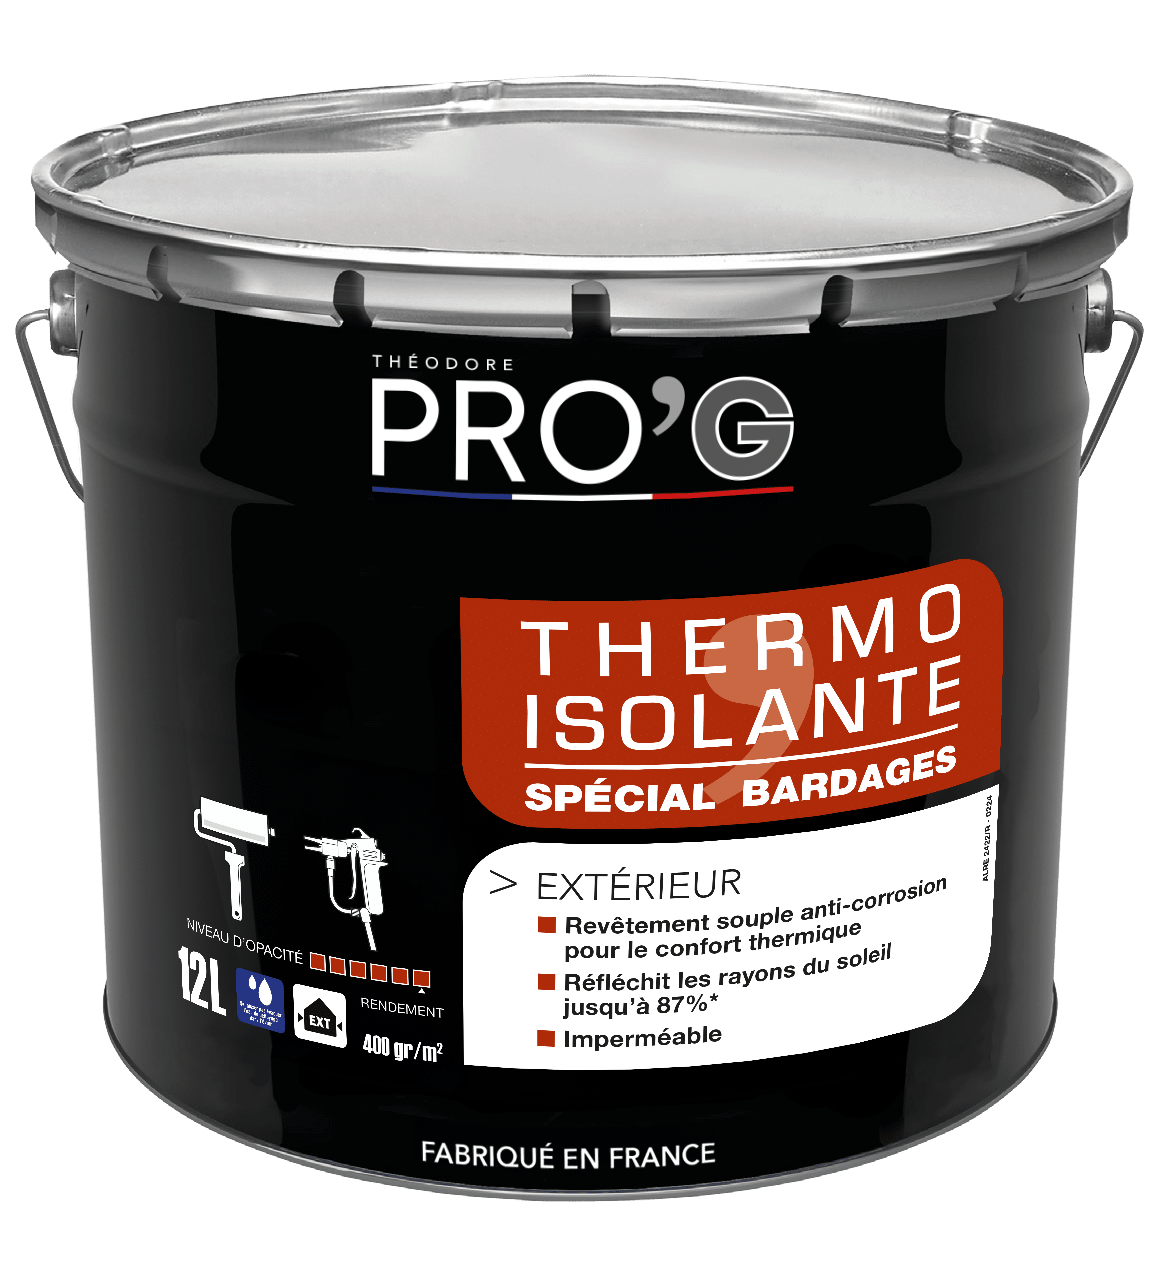 THERMO ISOLANTE SPECIAL BARDAGES